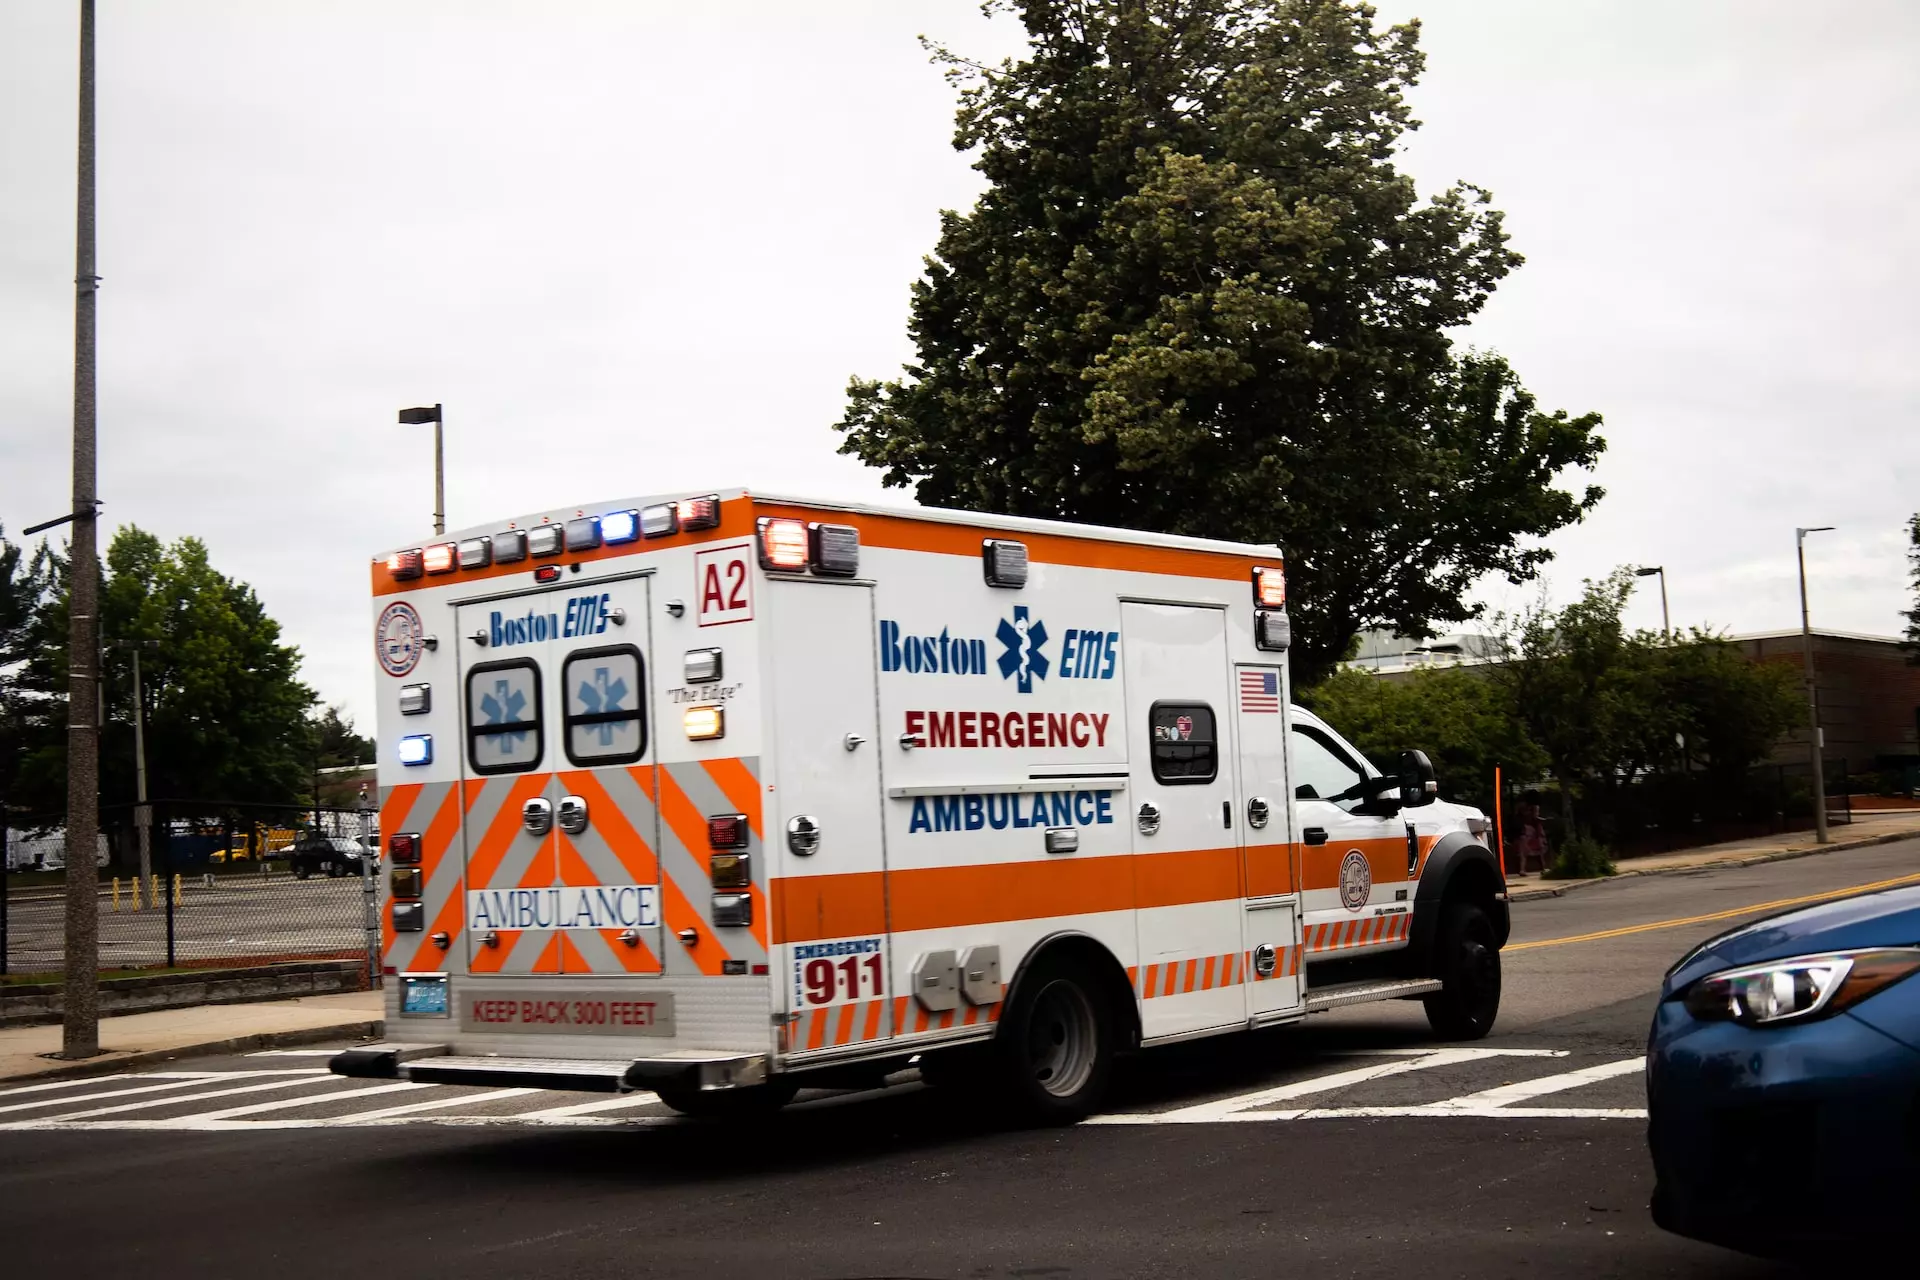 Private Ambulance Service: Reliable Transportation For Patients